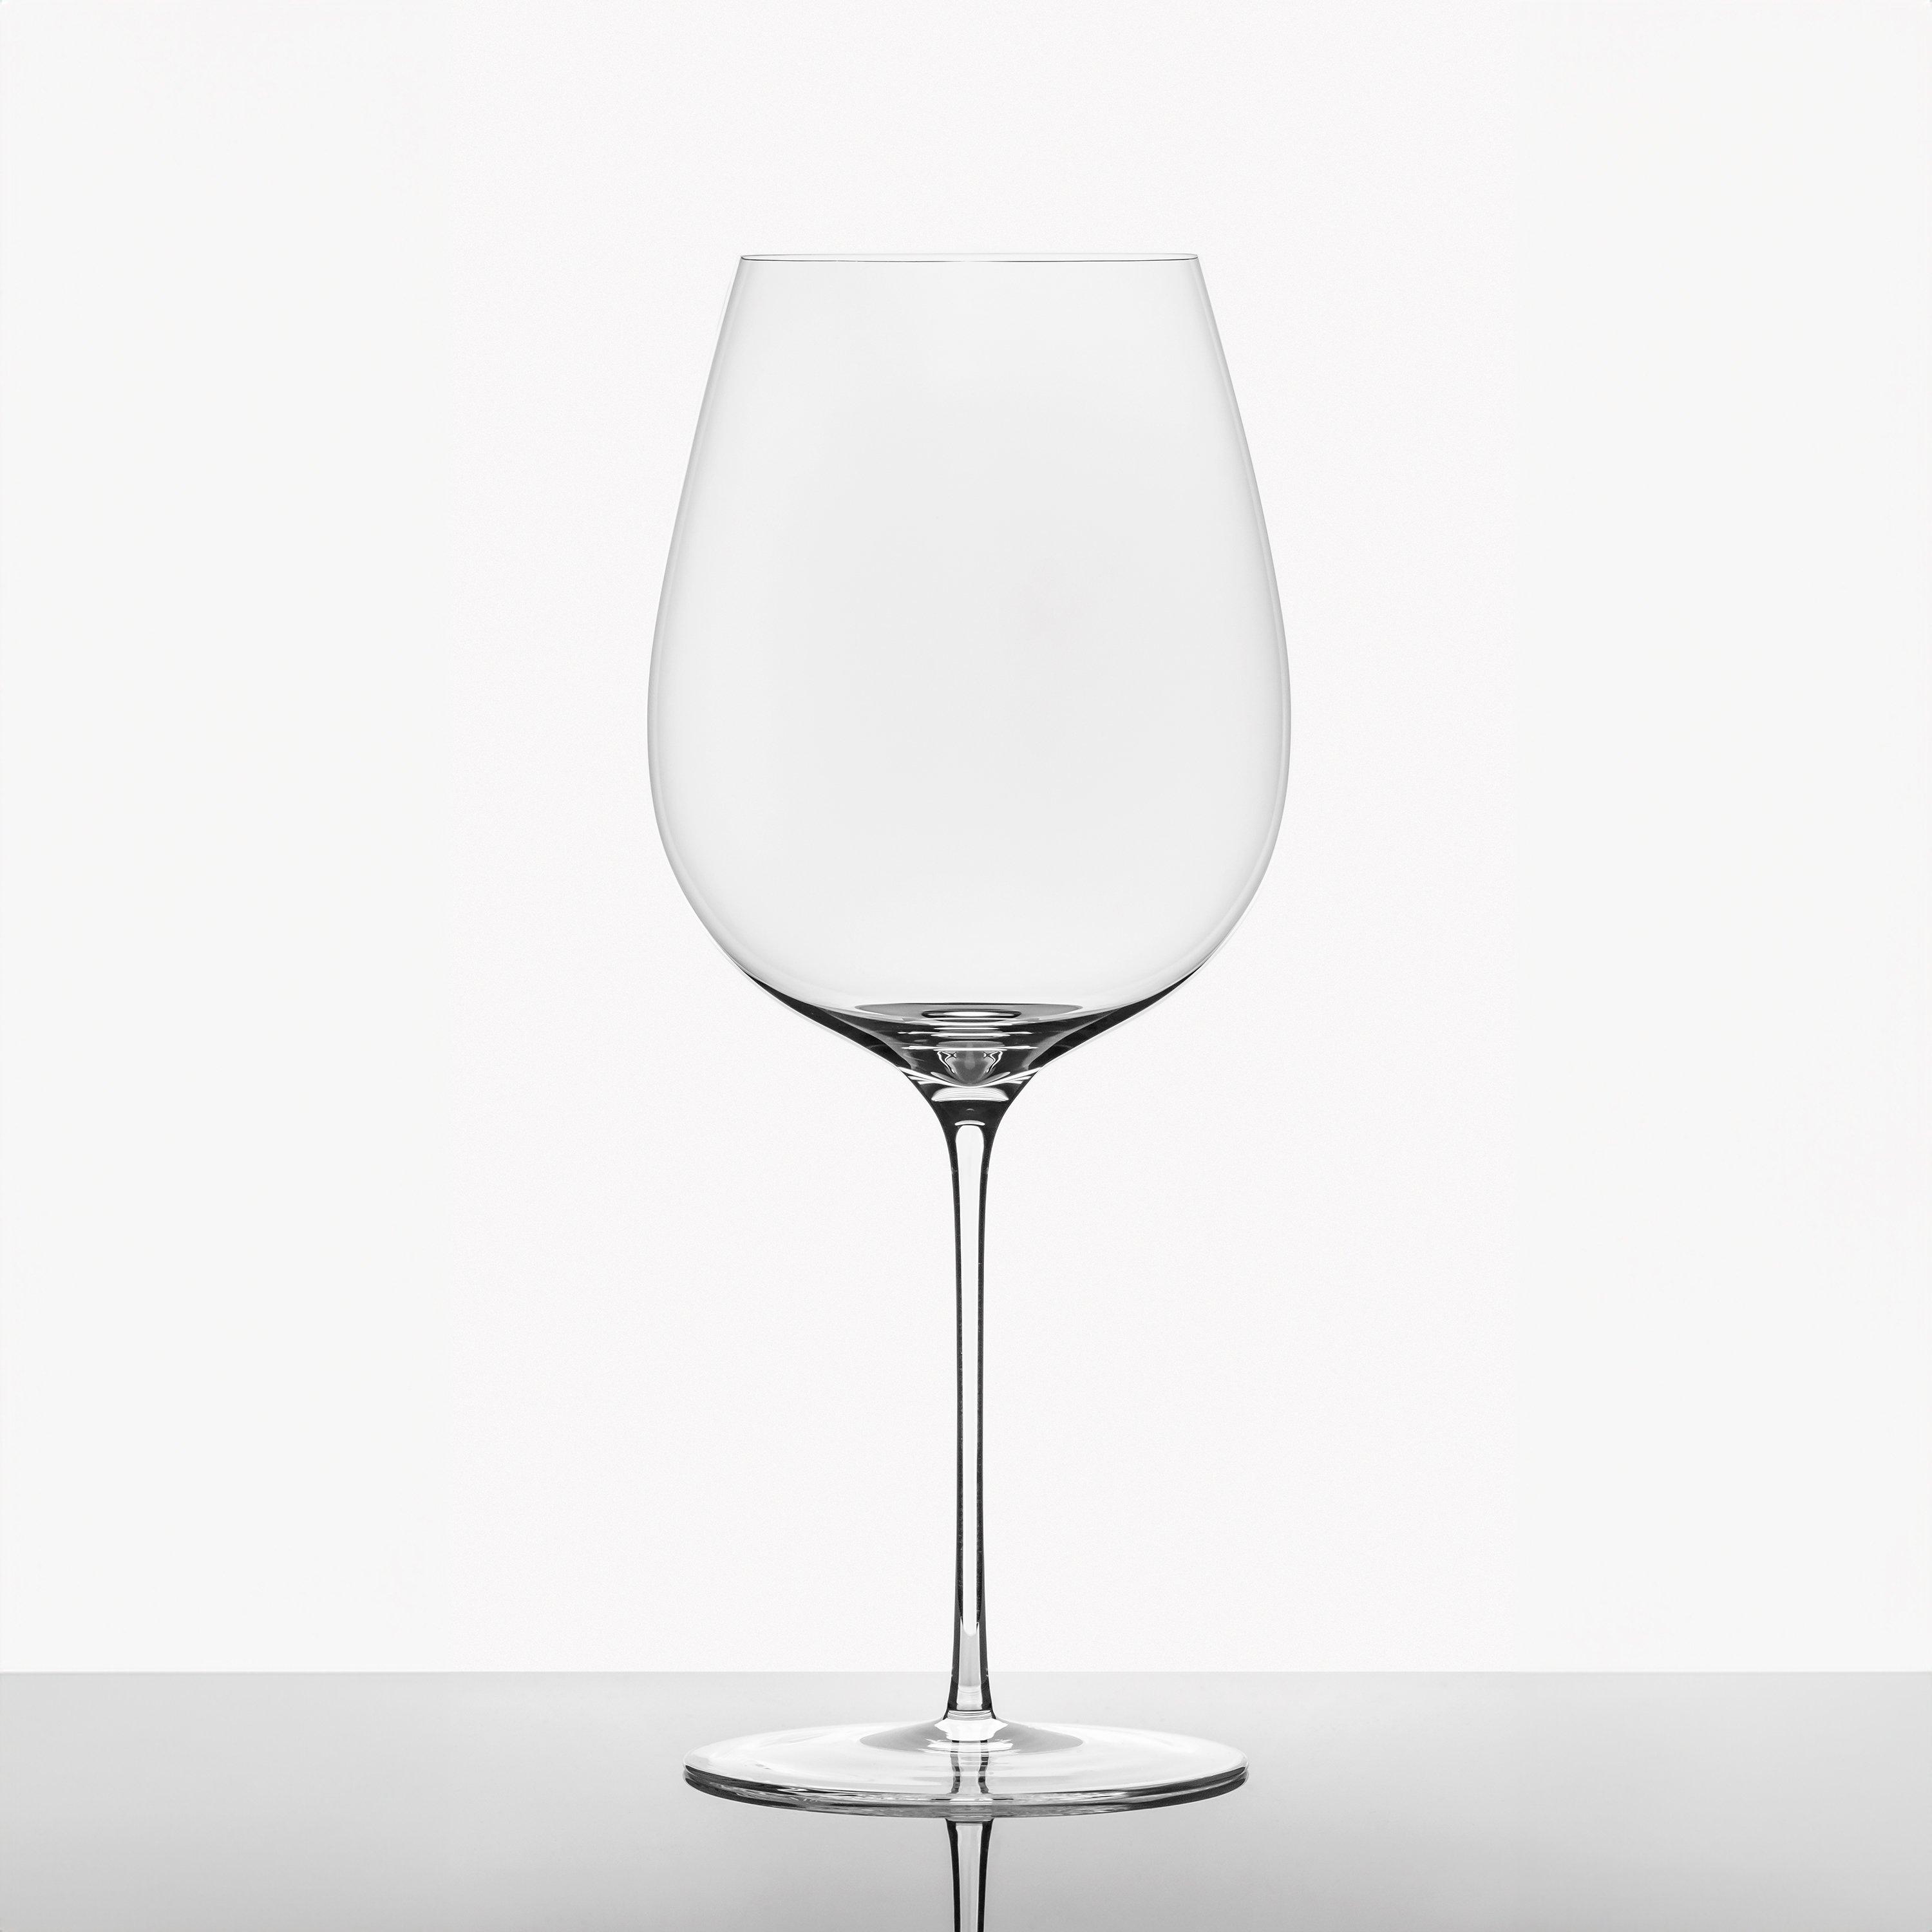 Sydonios Le Meridional Wine Glass (2 Pack)